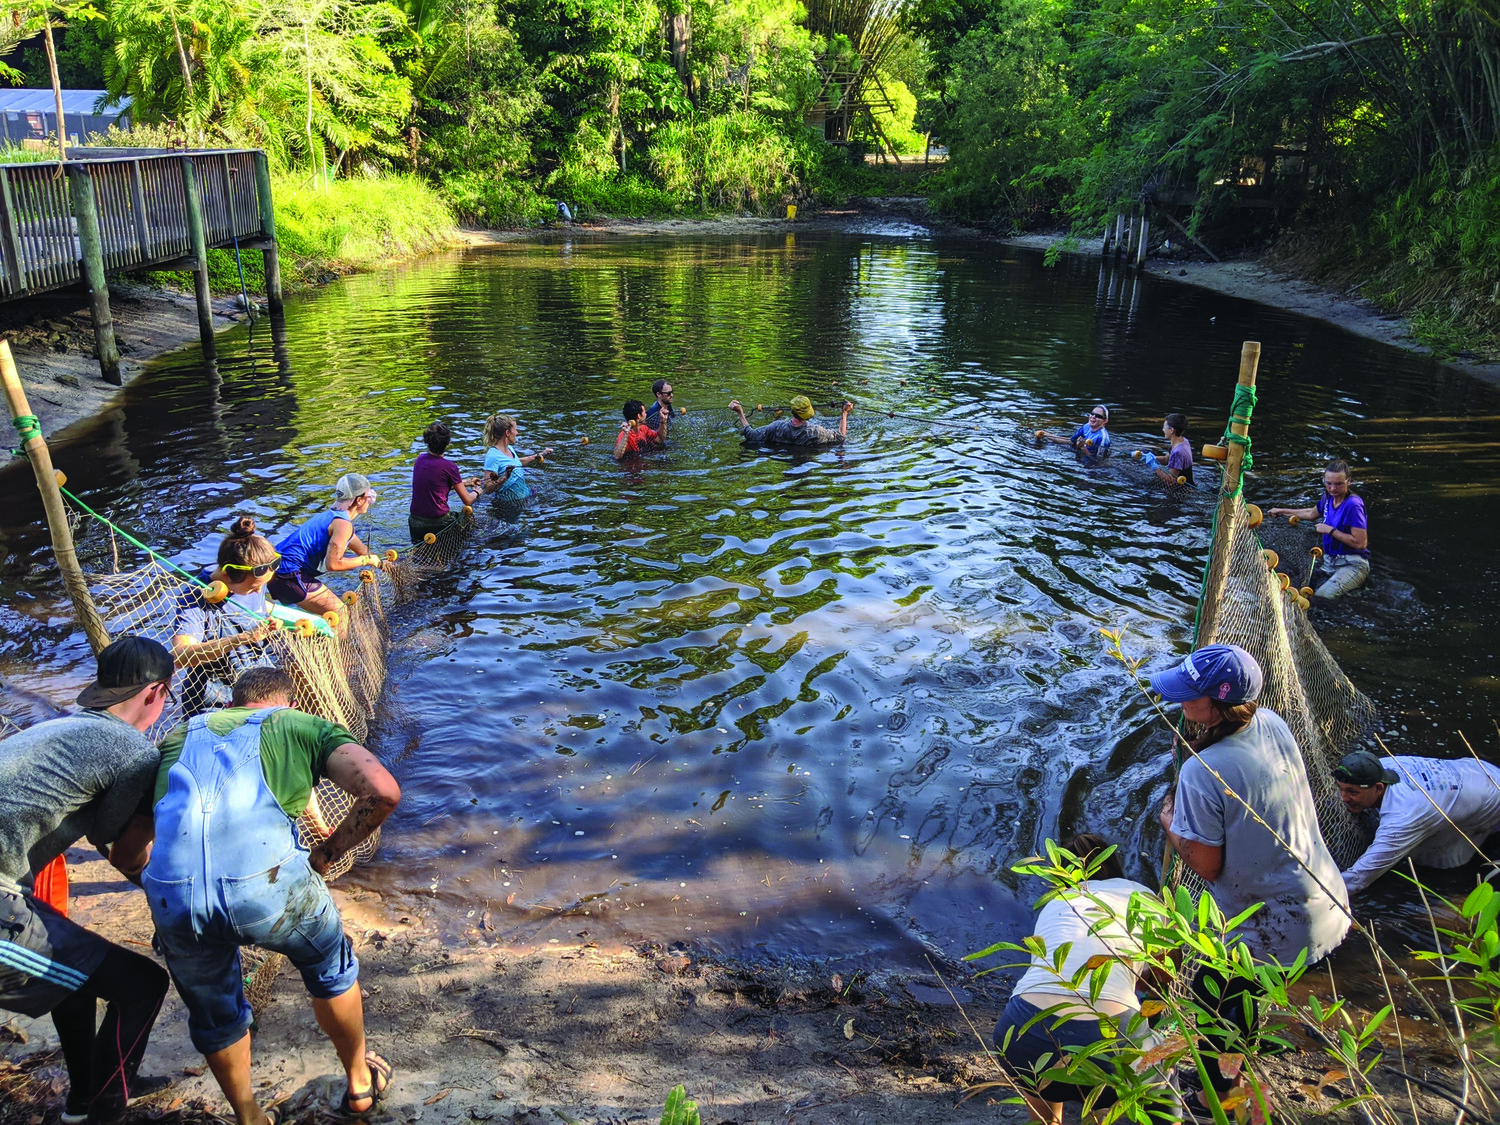 Interns and staff manually pass a net across the 
pond to harvest tilapia each year.